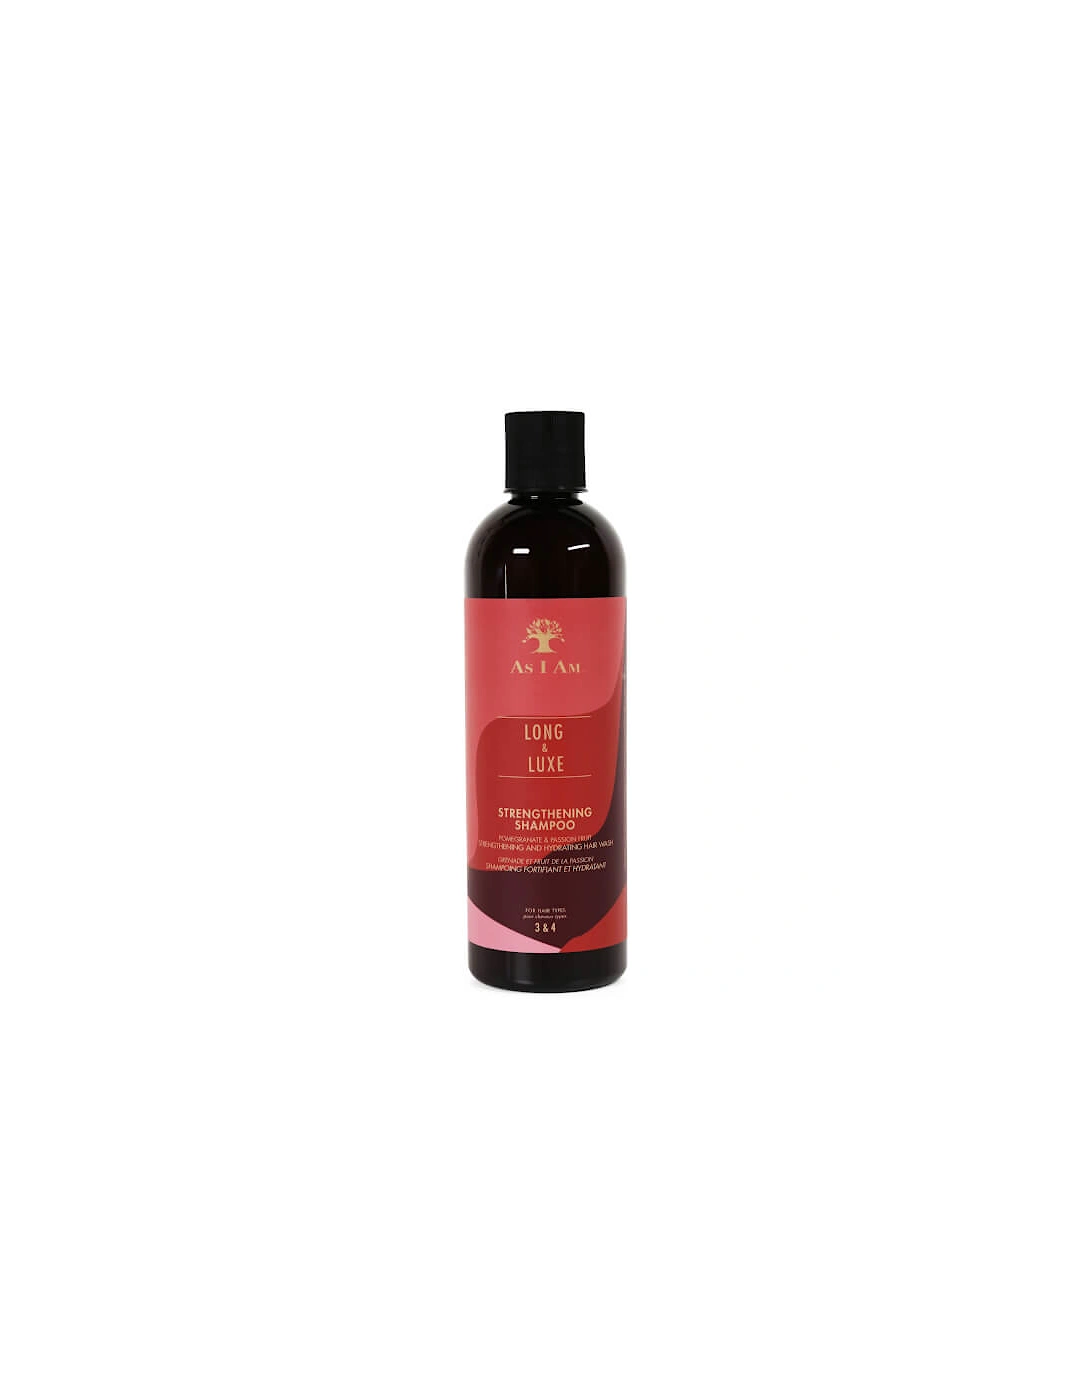 Long and Luxe Strengthening Shampoo 355ml - As I Am, 2 of 1